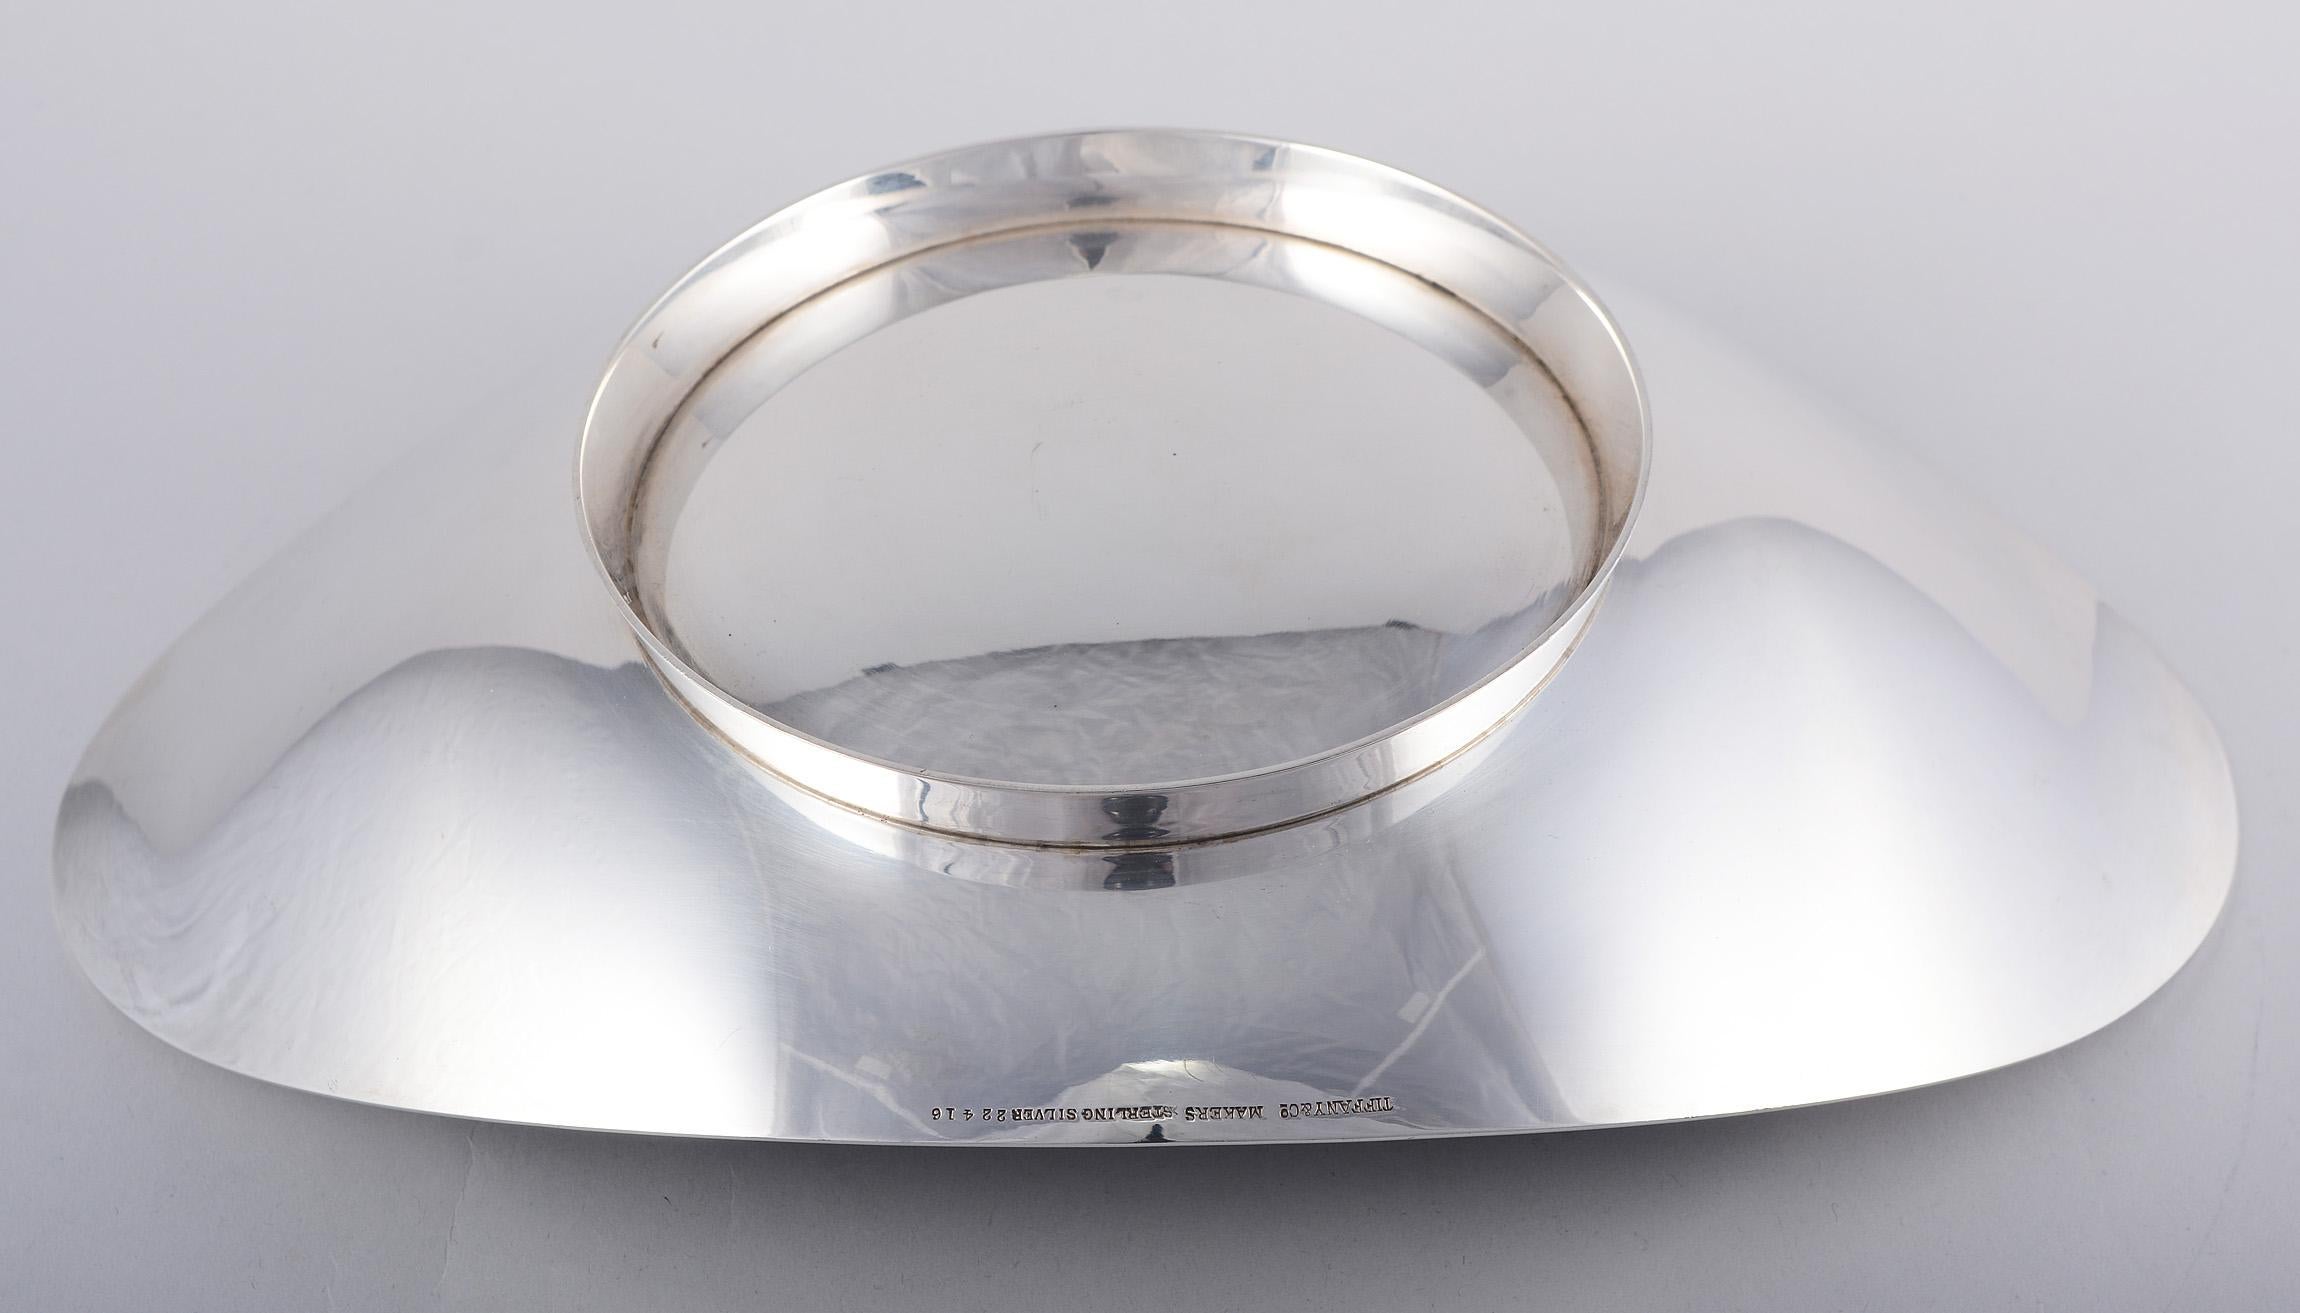 20th Century Modernist Sterling Silver Centerpiece Bowl by Tiffany & Co.